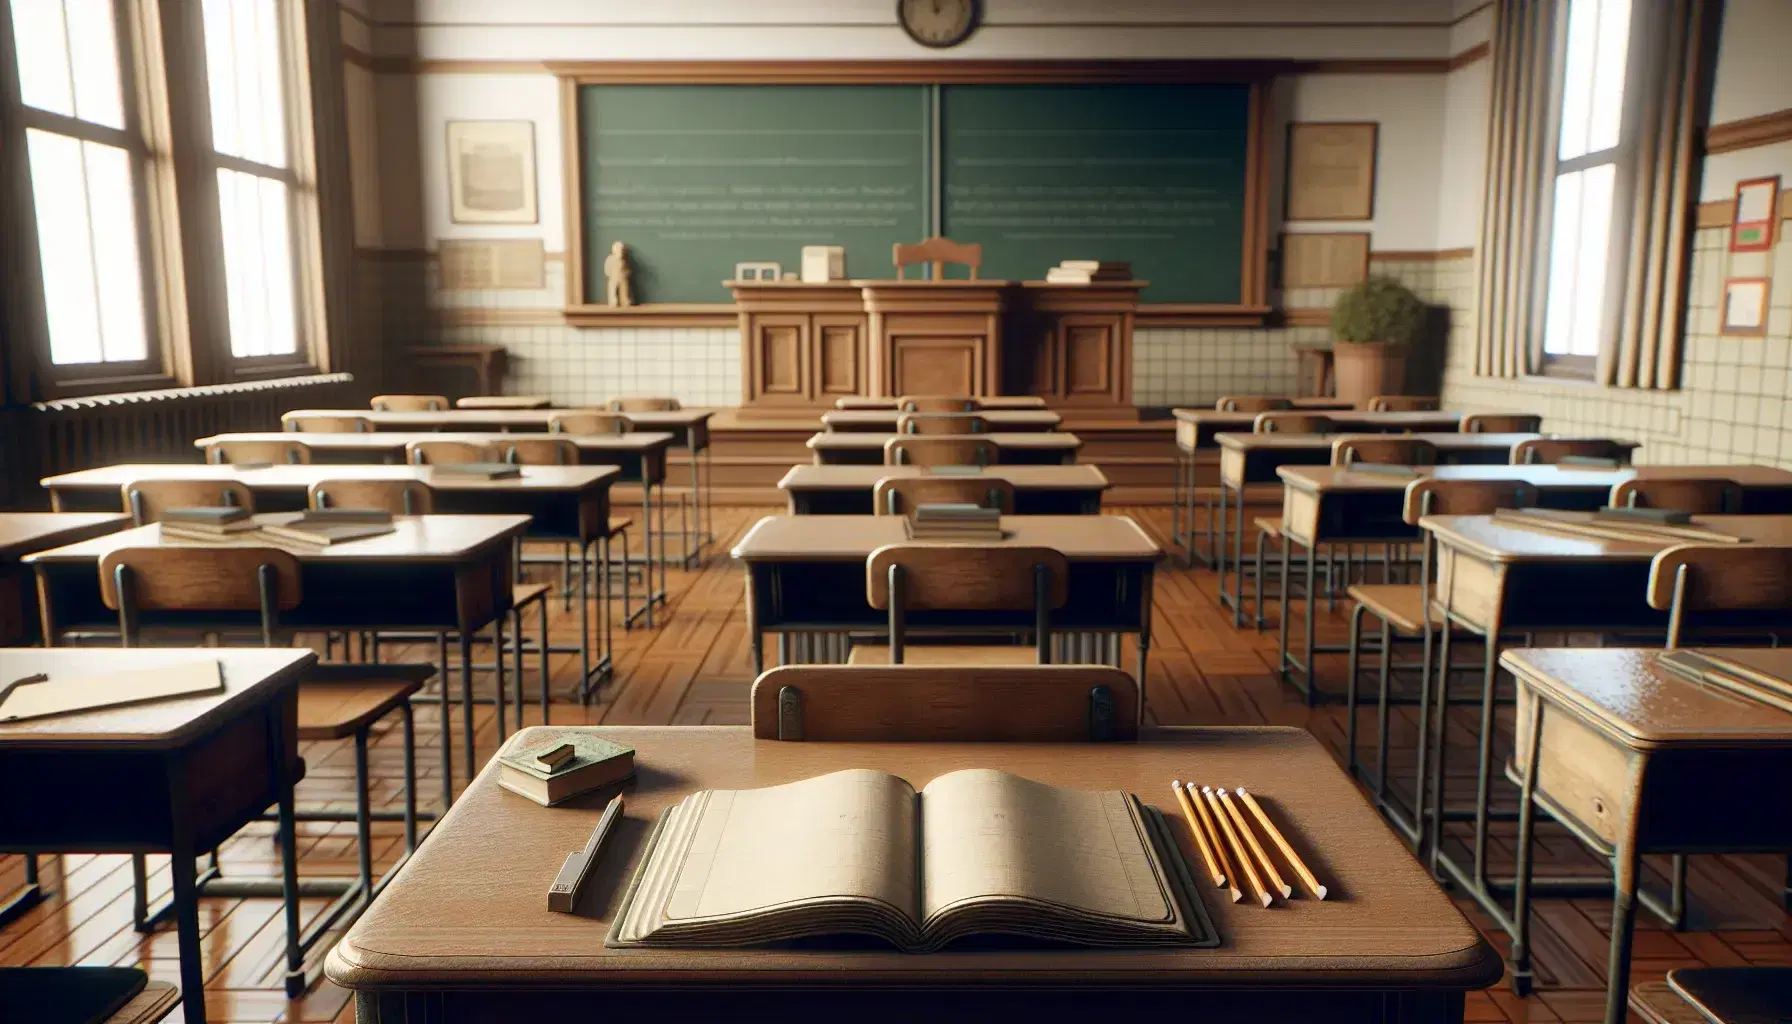 Traditional classroom with teacher's desk, open books, empty green blackboard, desks with notebooks and pencils, world map on wooden stand, beige walls and shiny floor.